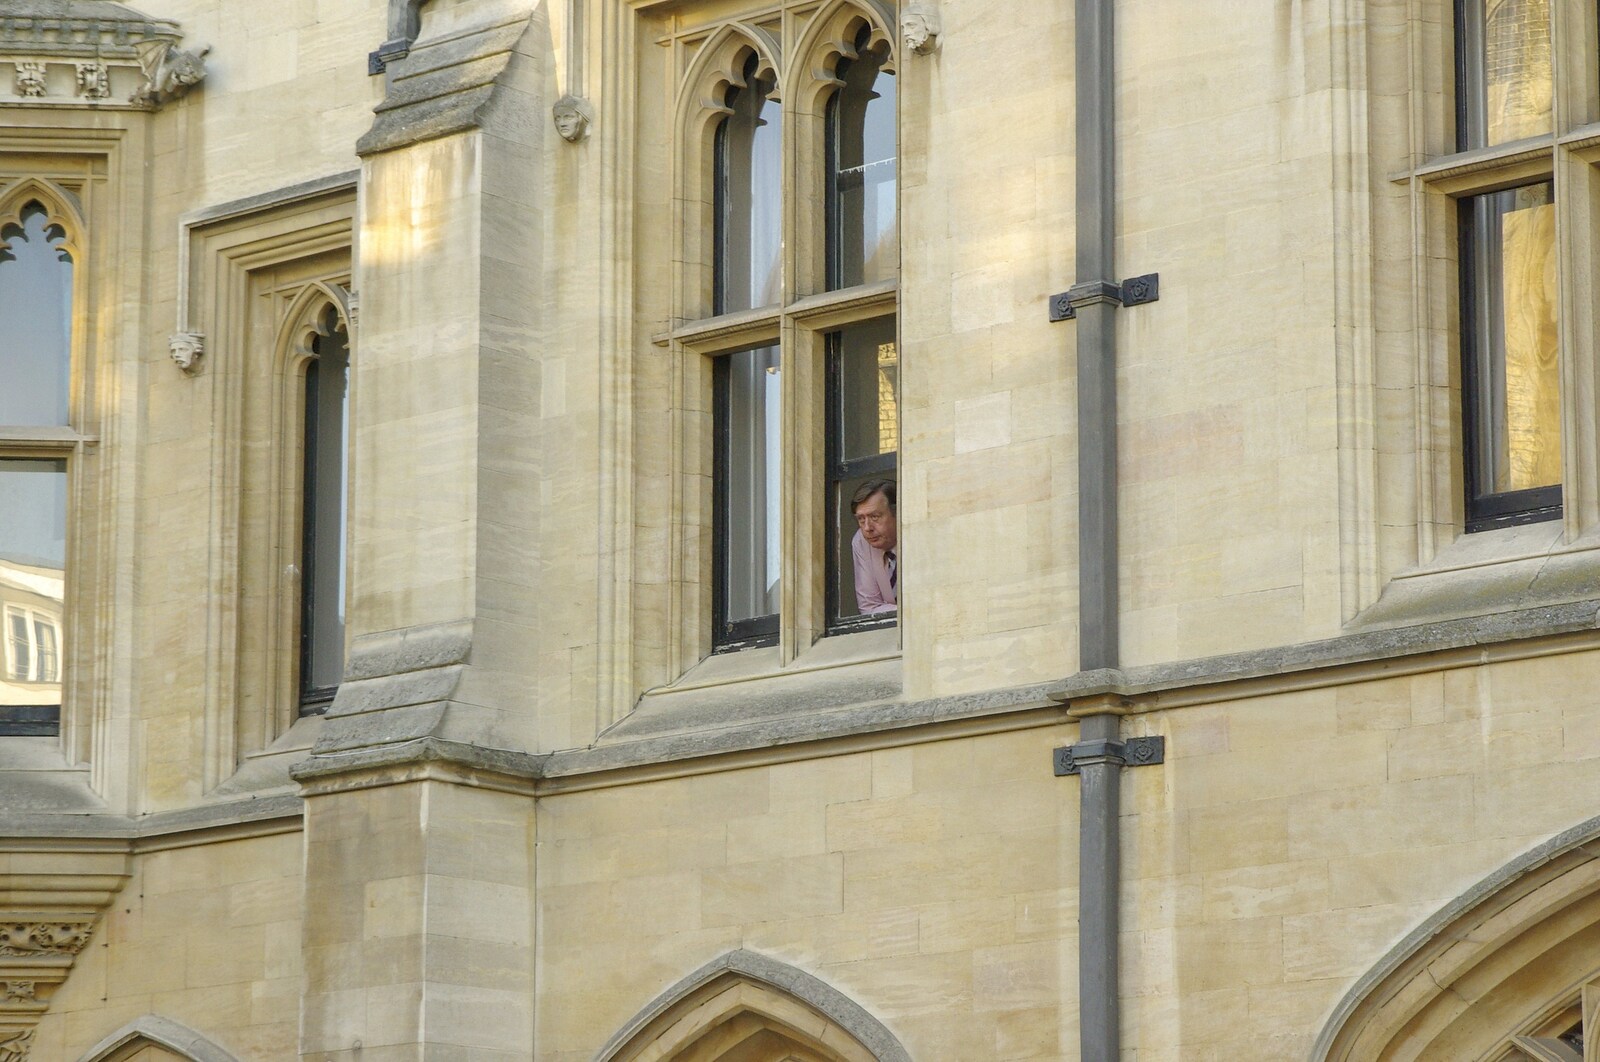 Some college dude peers out from his study window from A Brief Time in History: Stephen Hawking and the Corpus Christi Clock, Benet Street, Cambridge - 19th September 2008